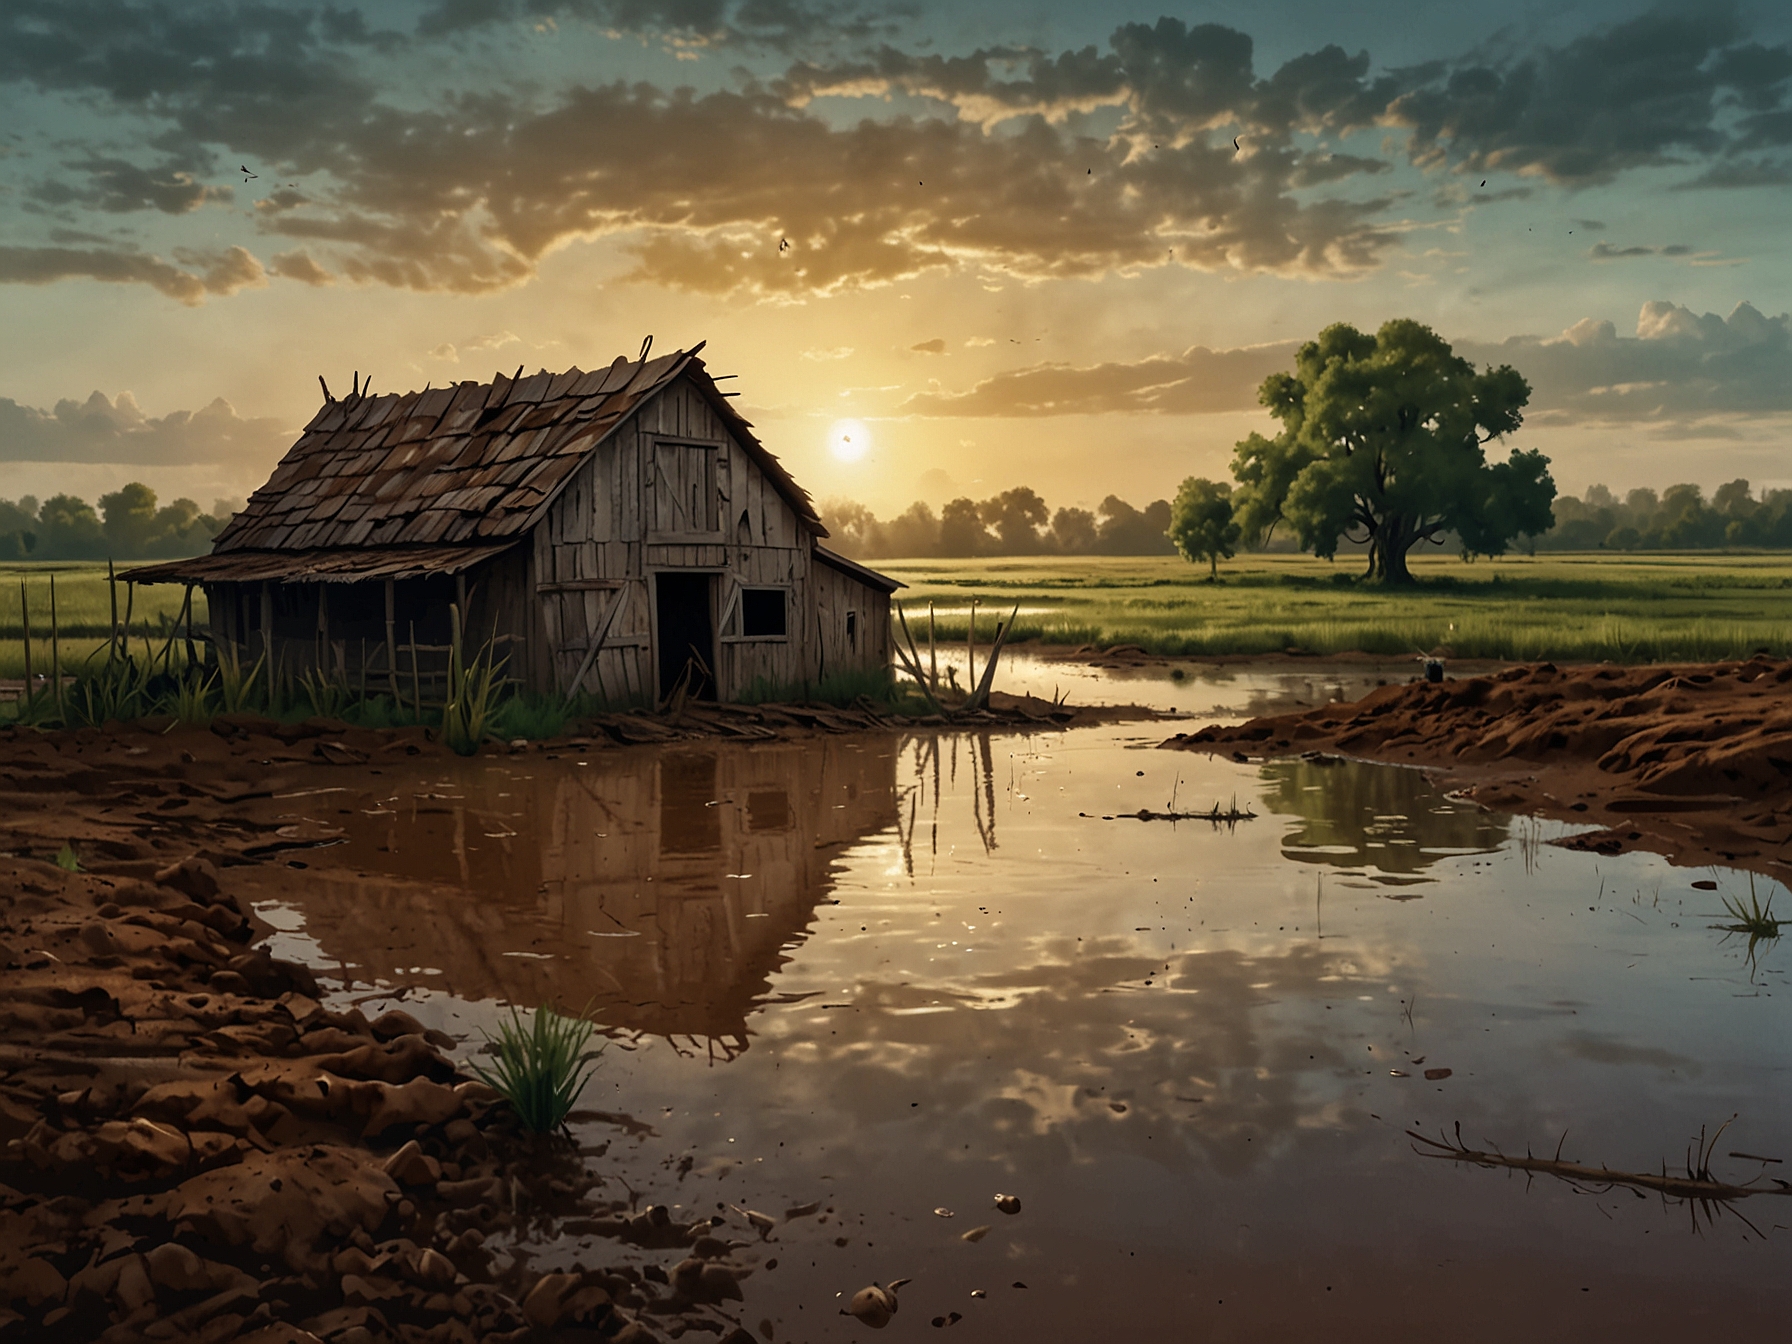 A flooded farm showcasing devastated crops and soil erosion, symbolizing the impact of unseasonal rains and droughts on agriculture, leading to food scarcity and rising costs in the grocery store.